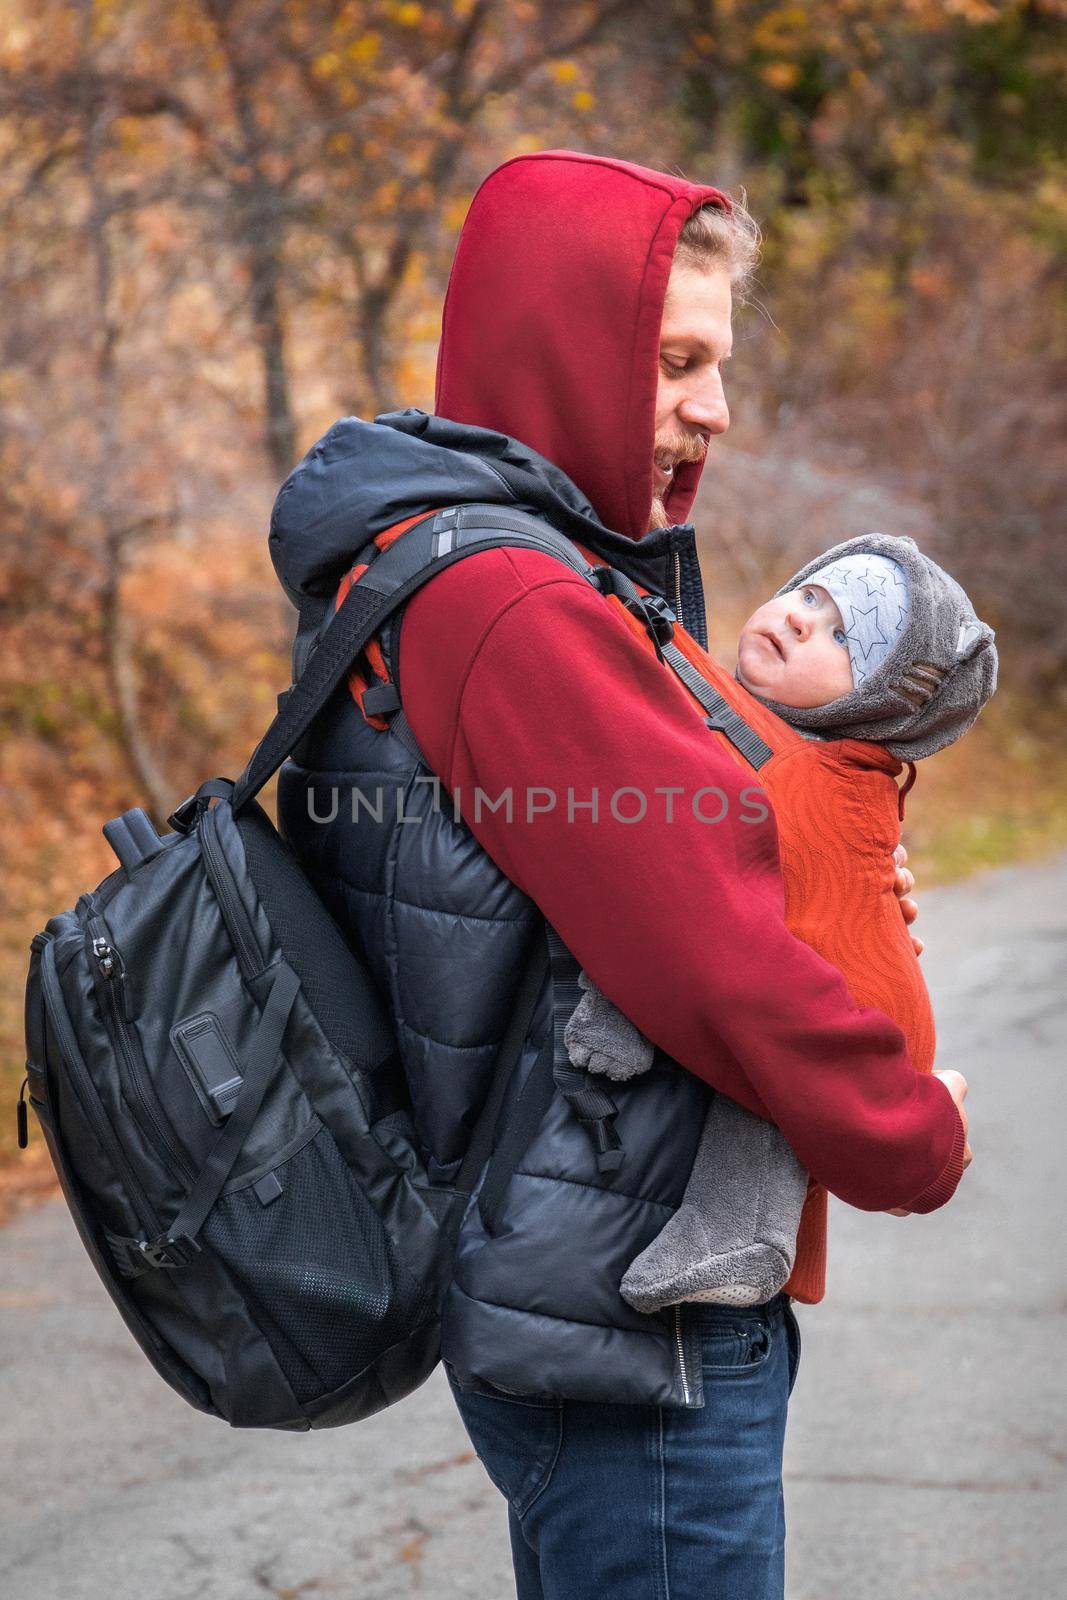 Young father with his baby in ergonomic baby carrier in autumn hiking. Babywearing and active father concept.